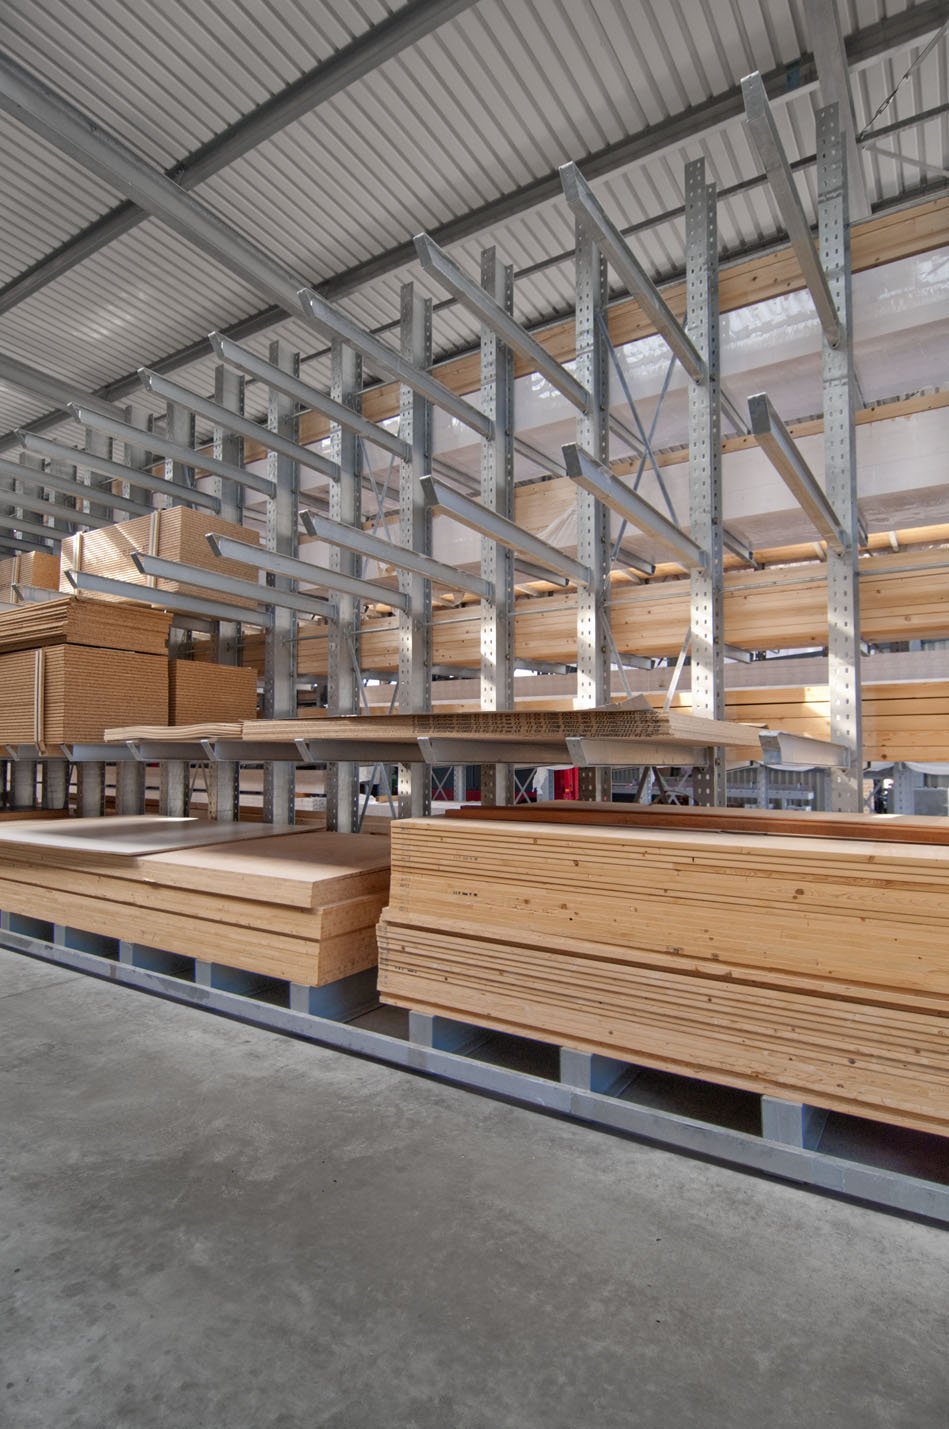 [Translate "Italien"] Cantilever racking timber trade